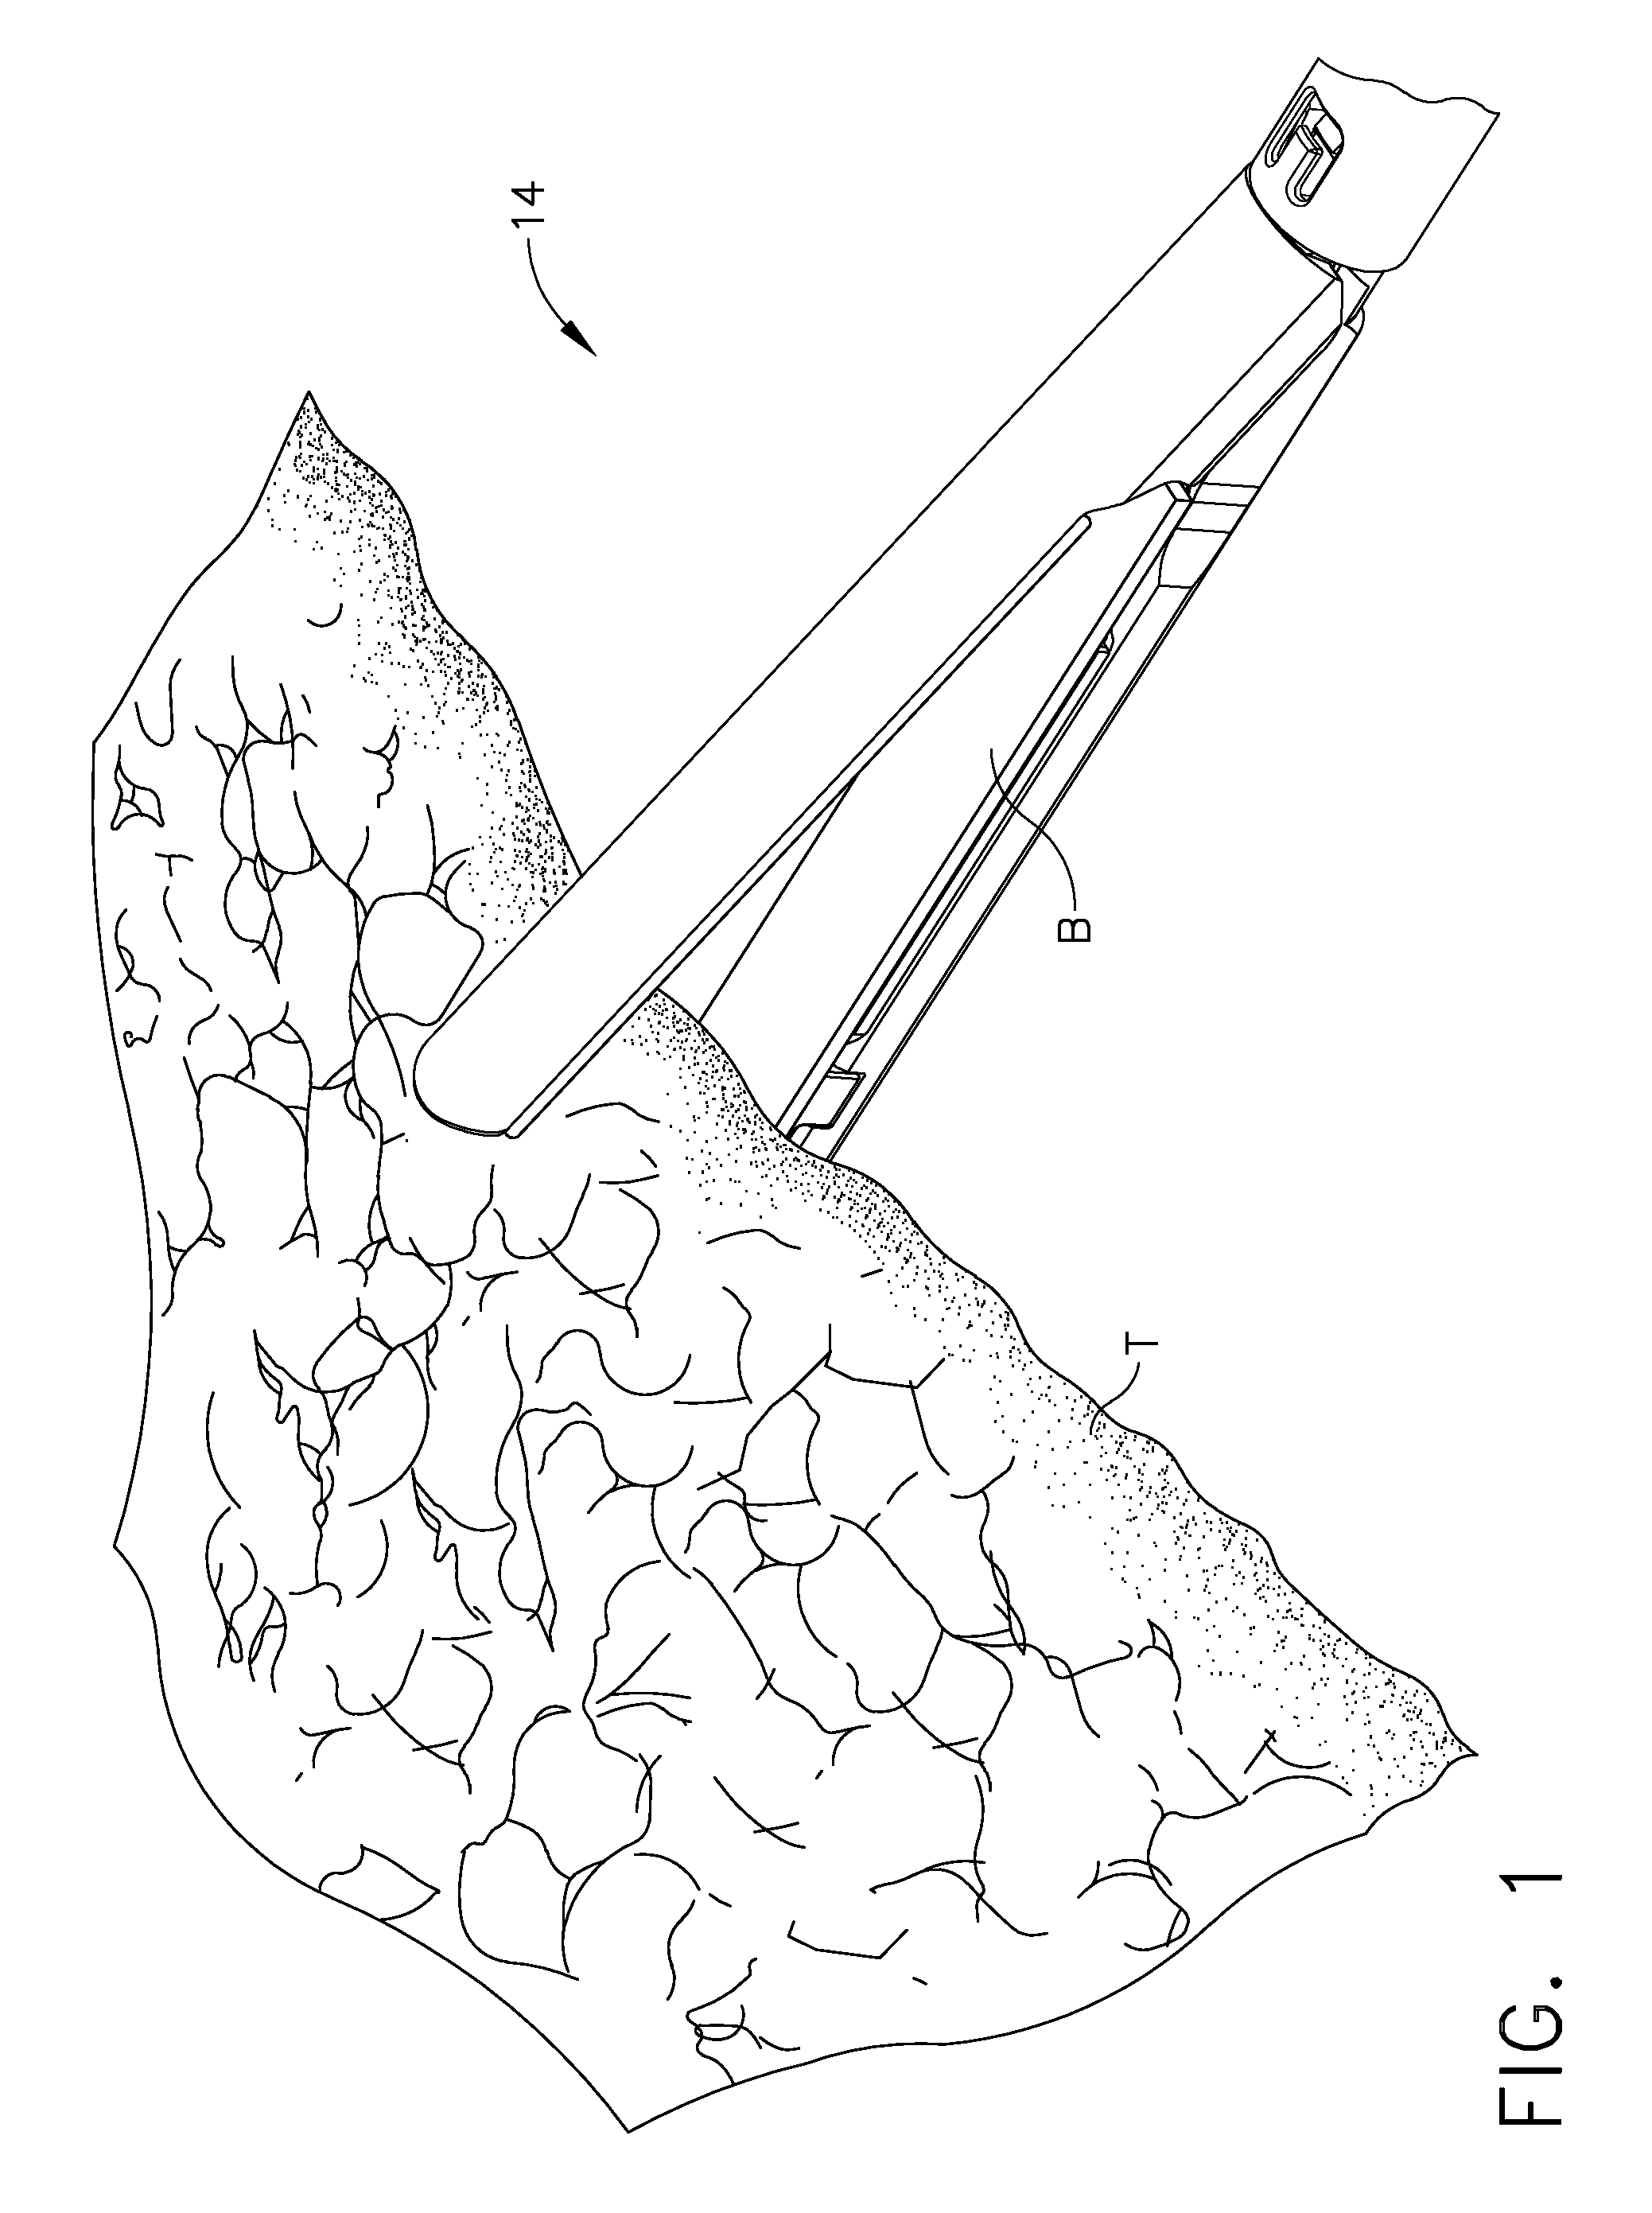 Packaging for attaching buttress material to a surgical stapling instrument